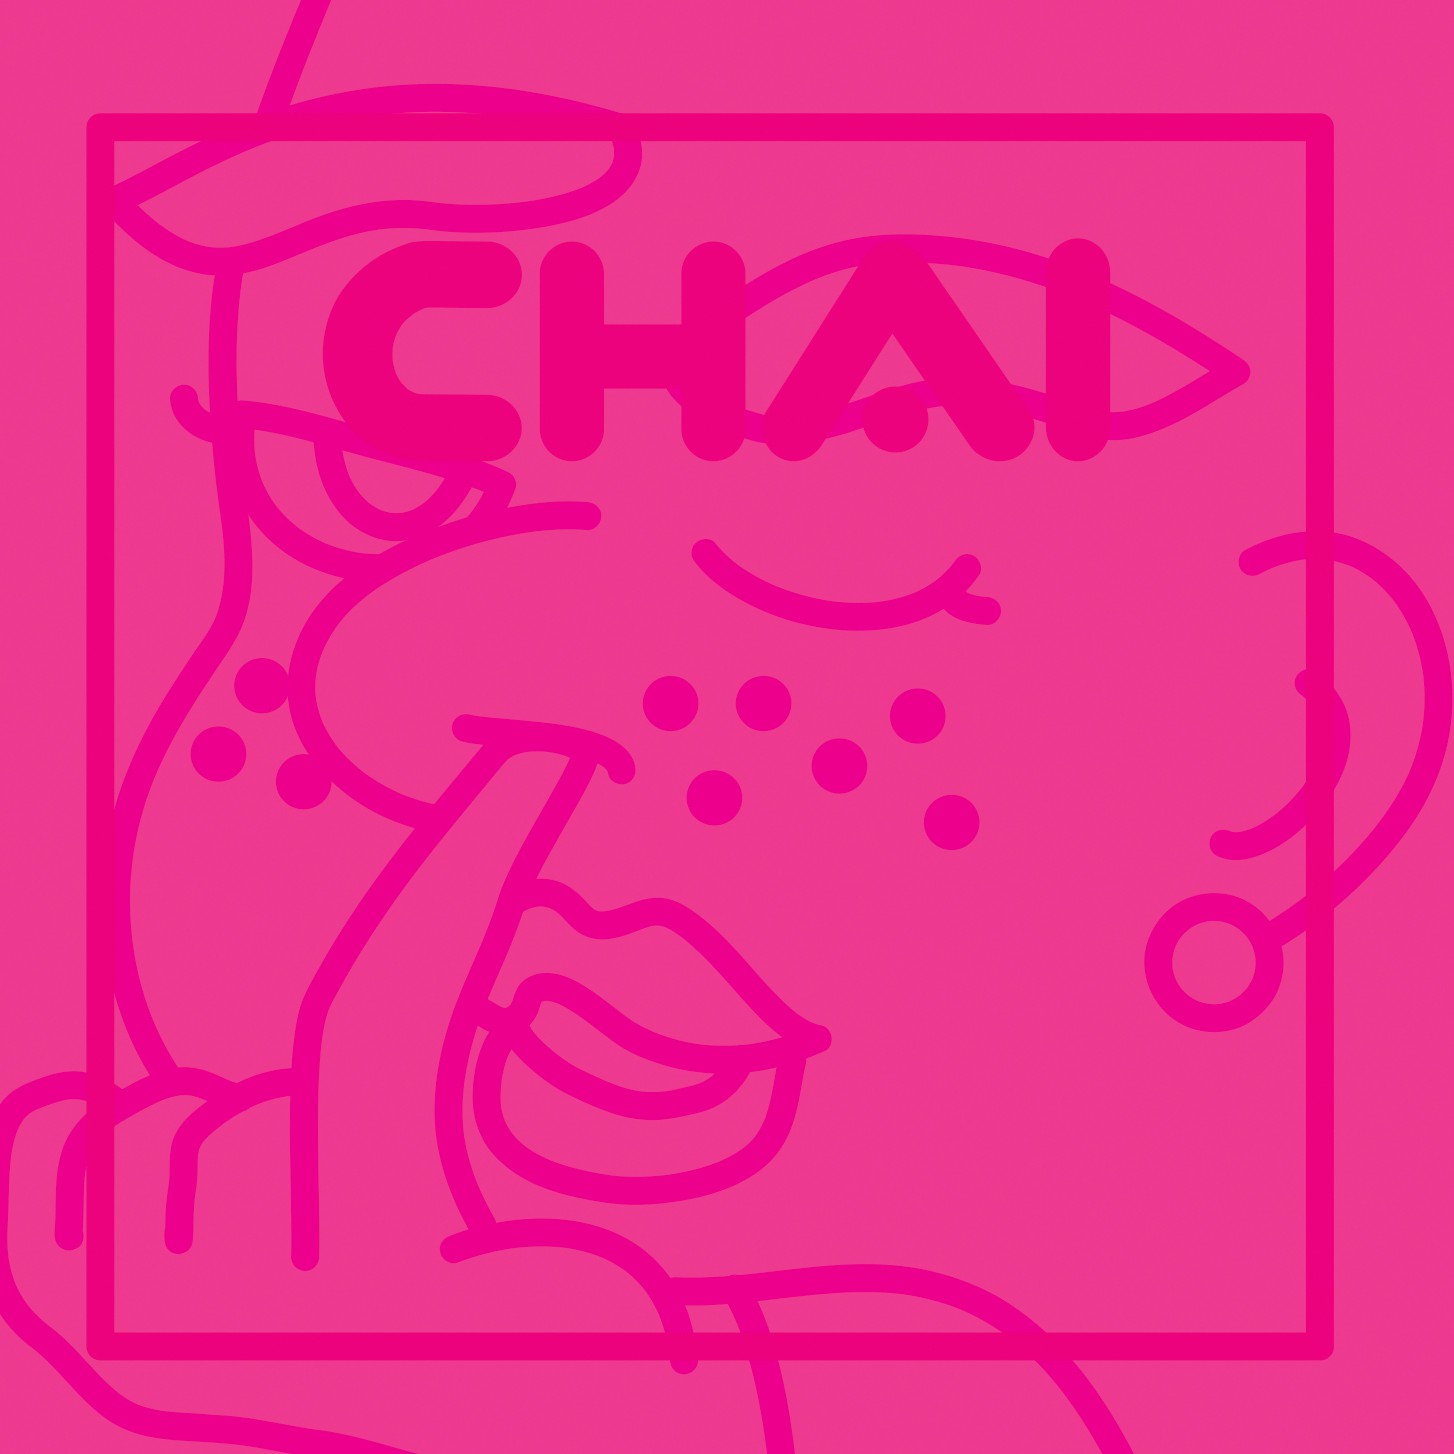 CHAI - Pink (Heavenly Records)